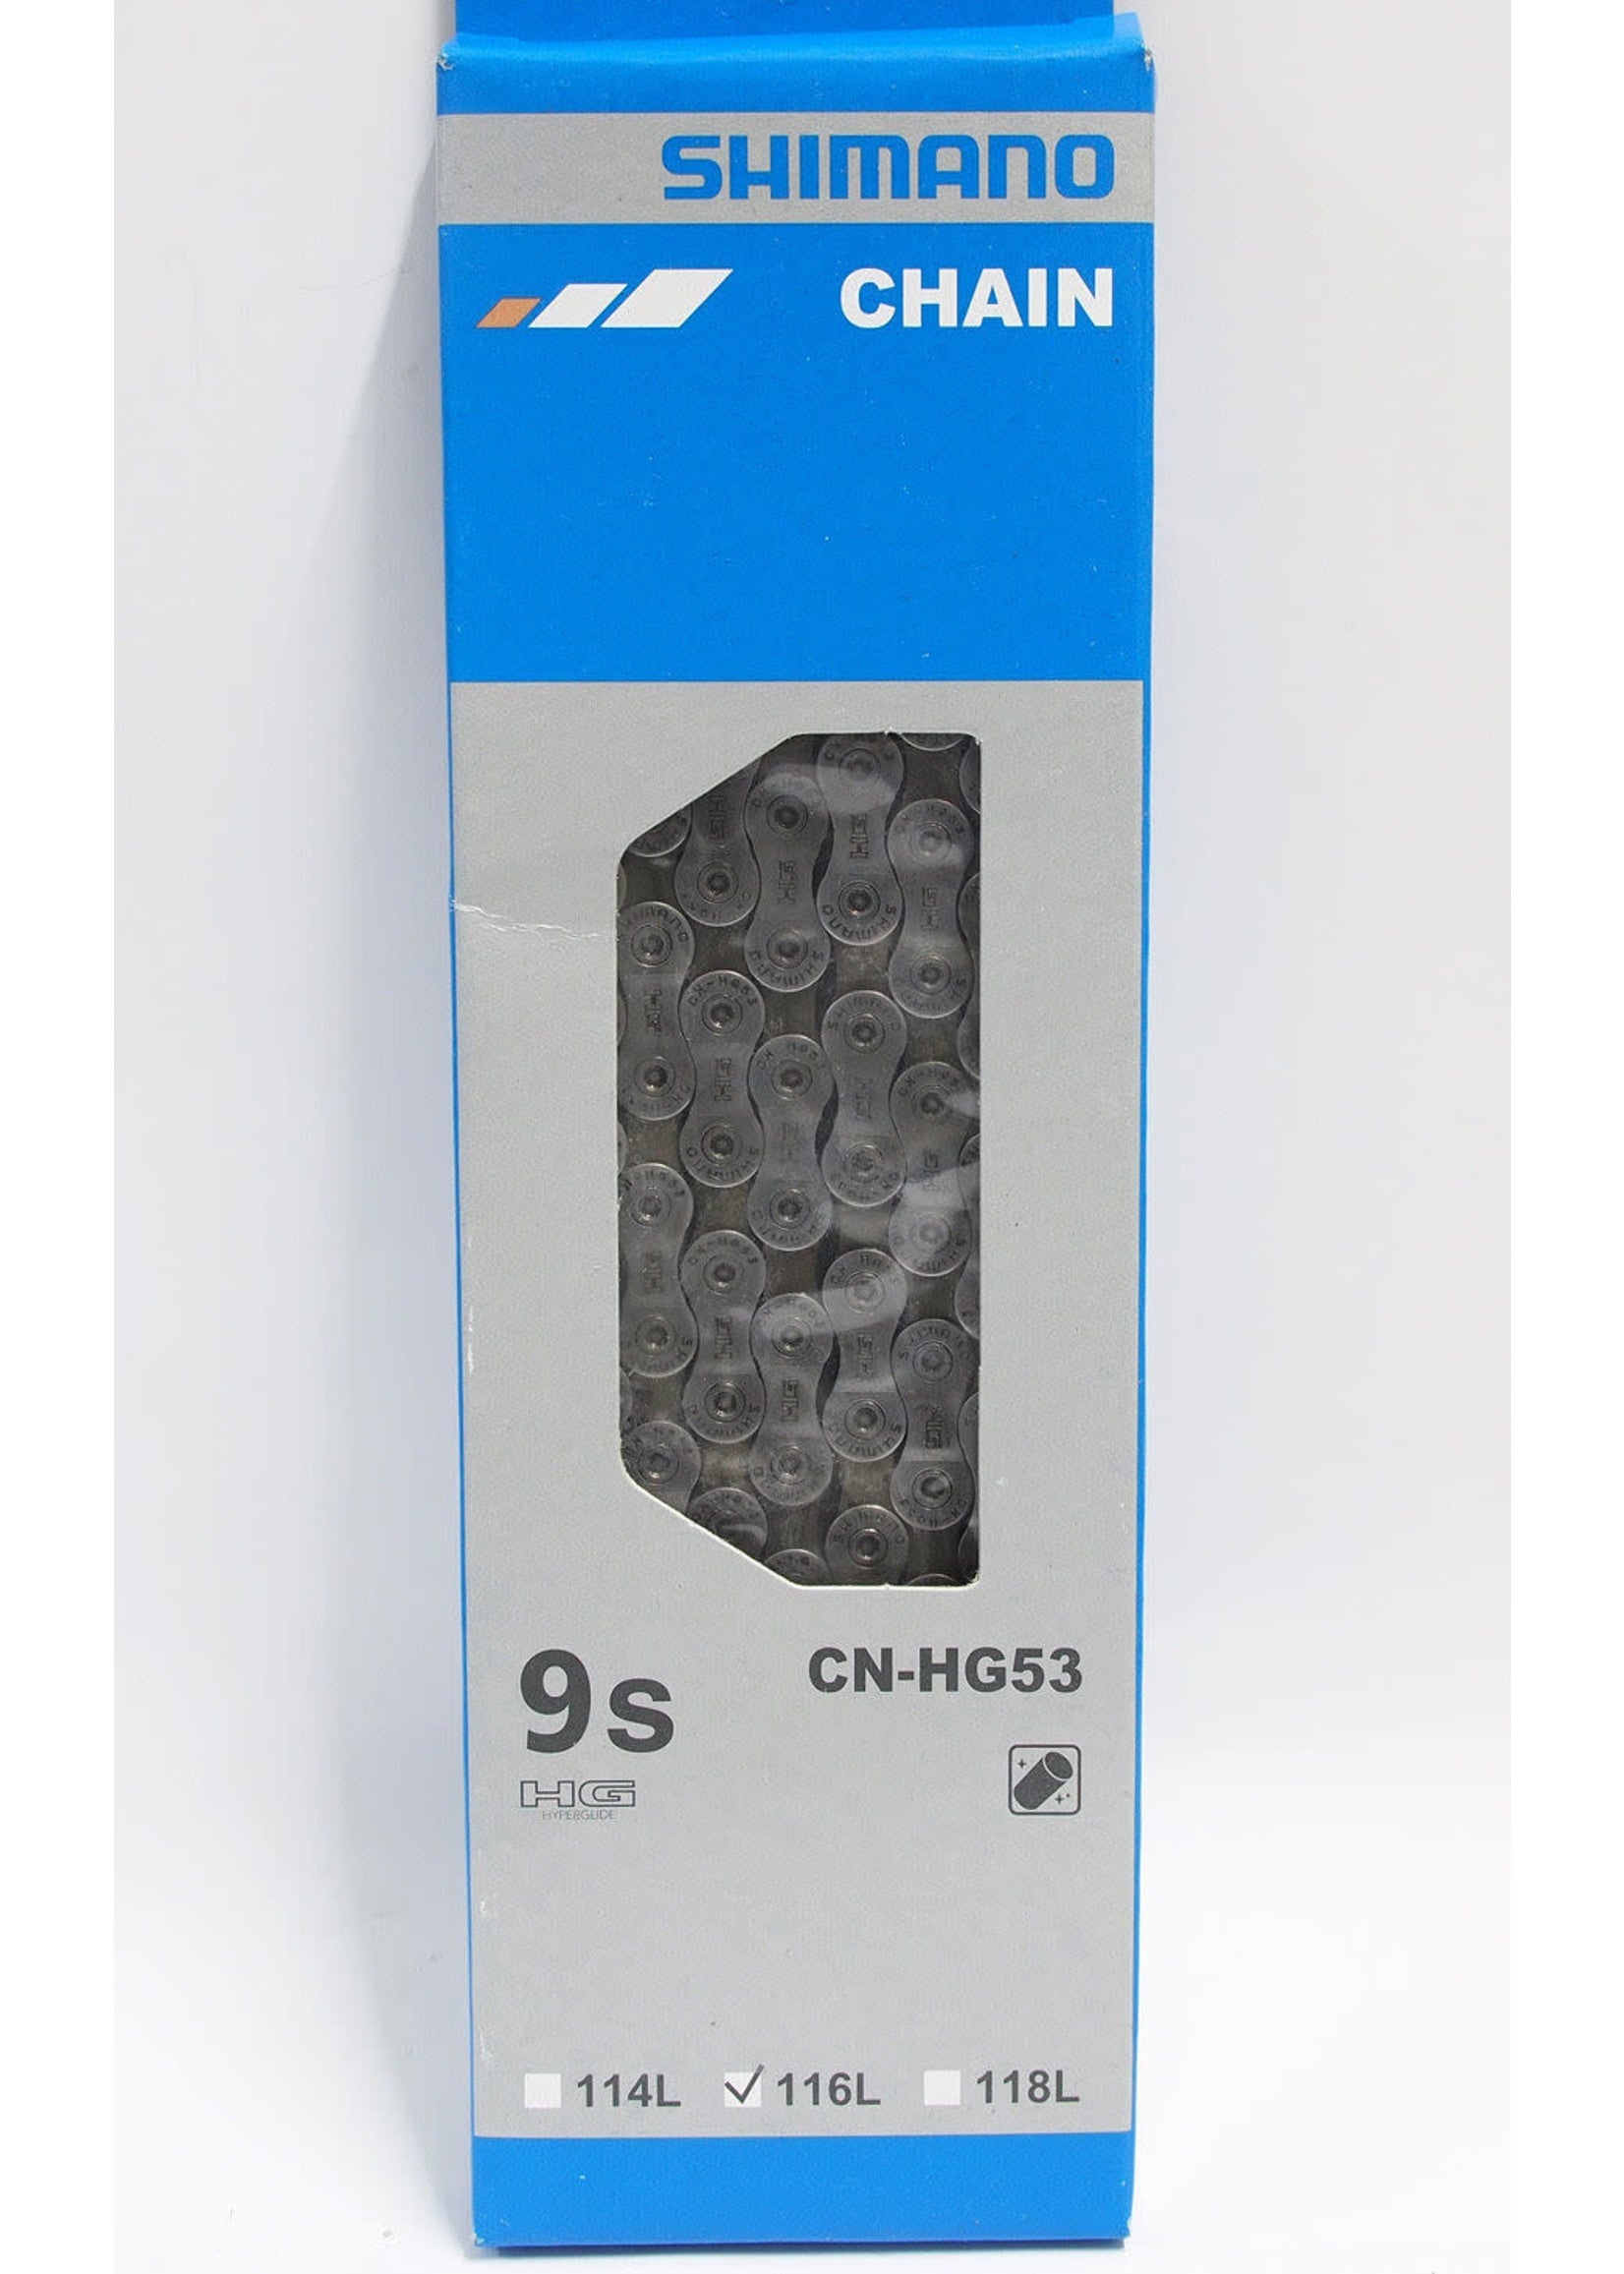 Shimano CN-HG53116 Link W/Ampoule End Pin X 1 Bicycle Chain